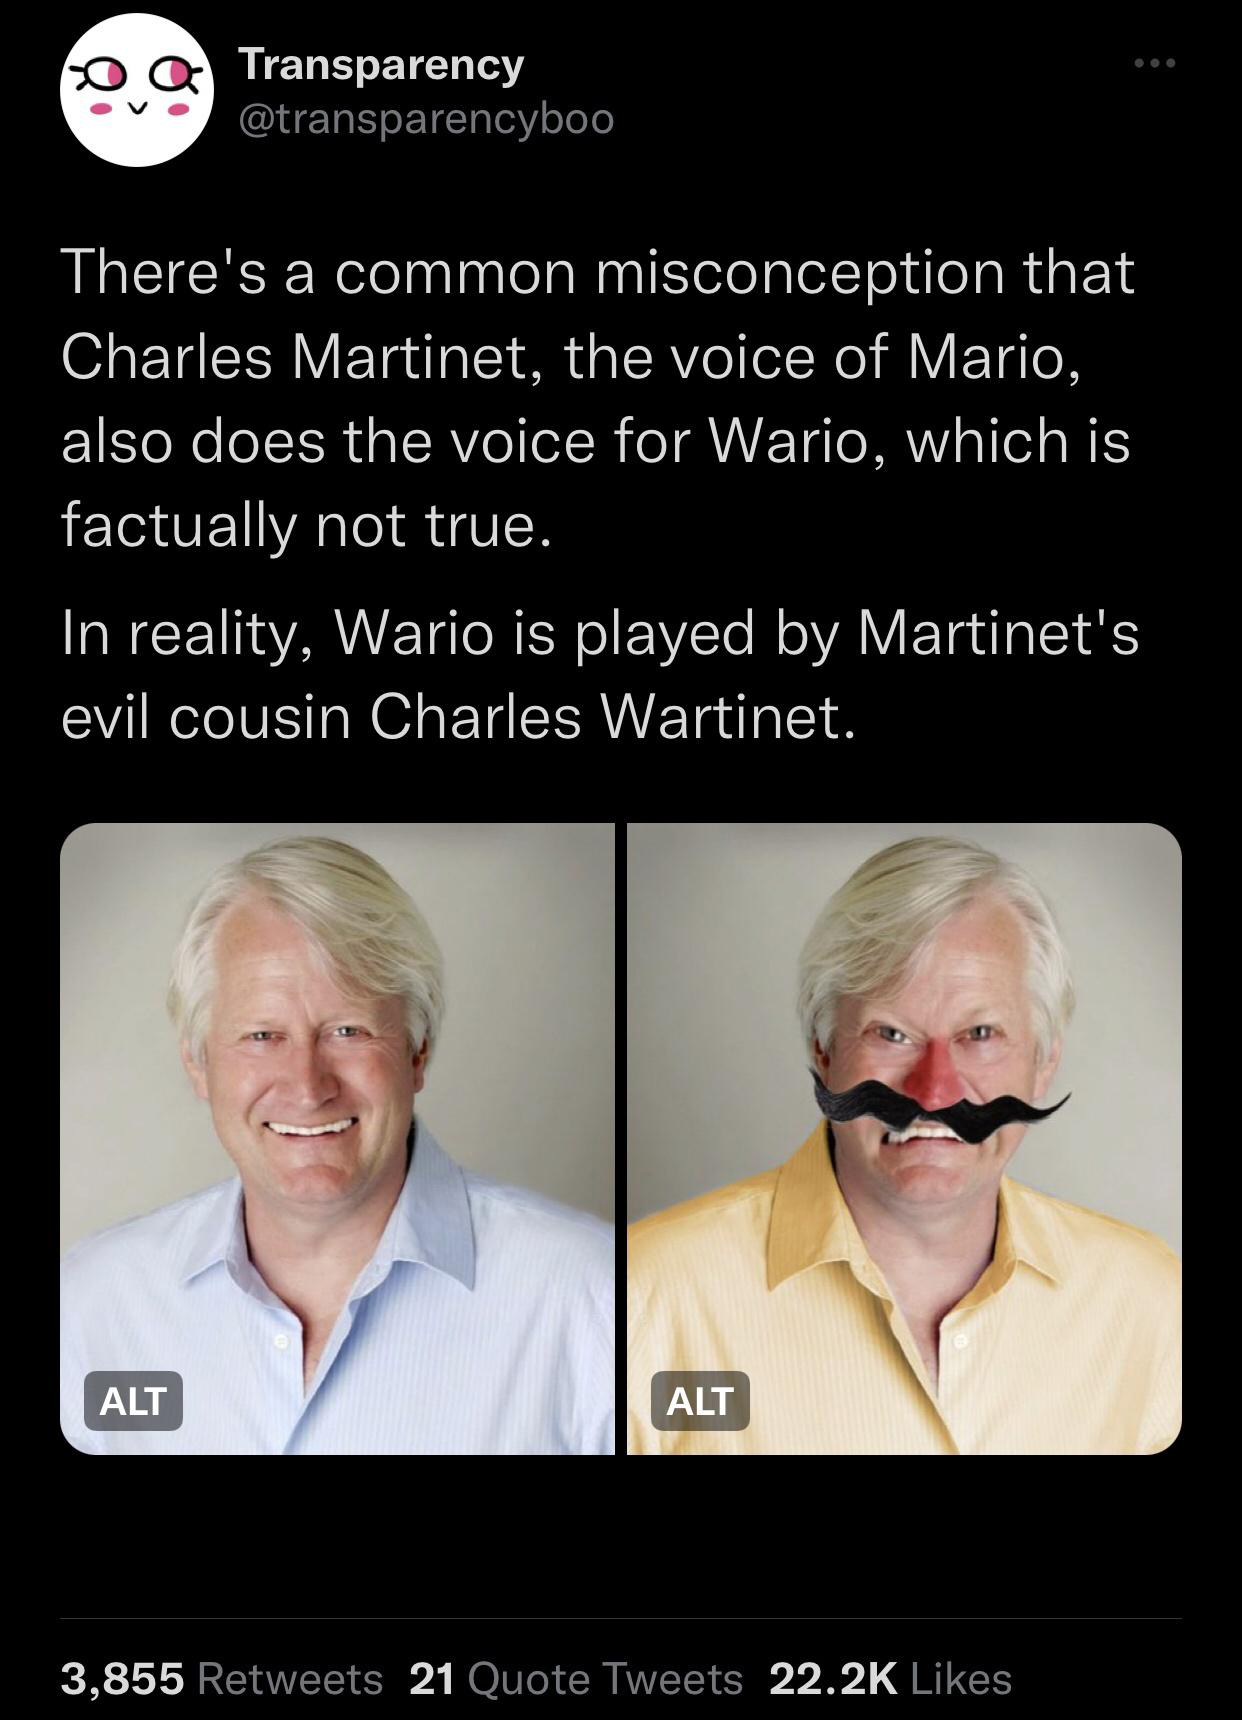 daily dose of pics and memes - charles martinet - Transparency There's a common misconception that Charles Martinet, the voice of Mario, also does the voice for Wario, which is factually not true. In reality, Wario is played by Martinet's evil cousin Char